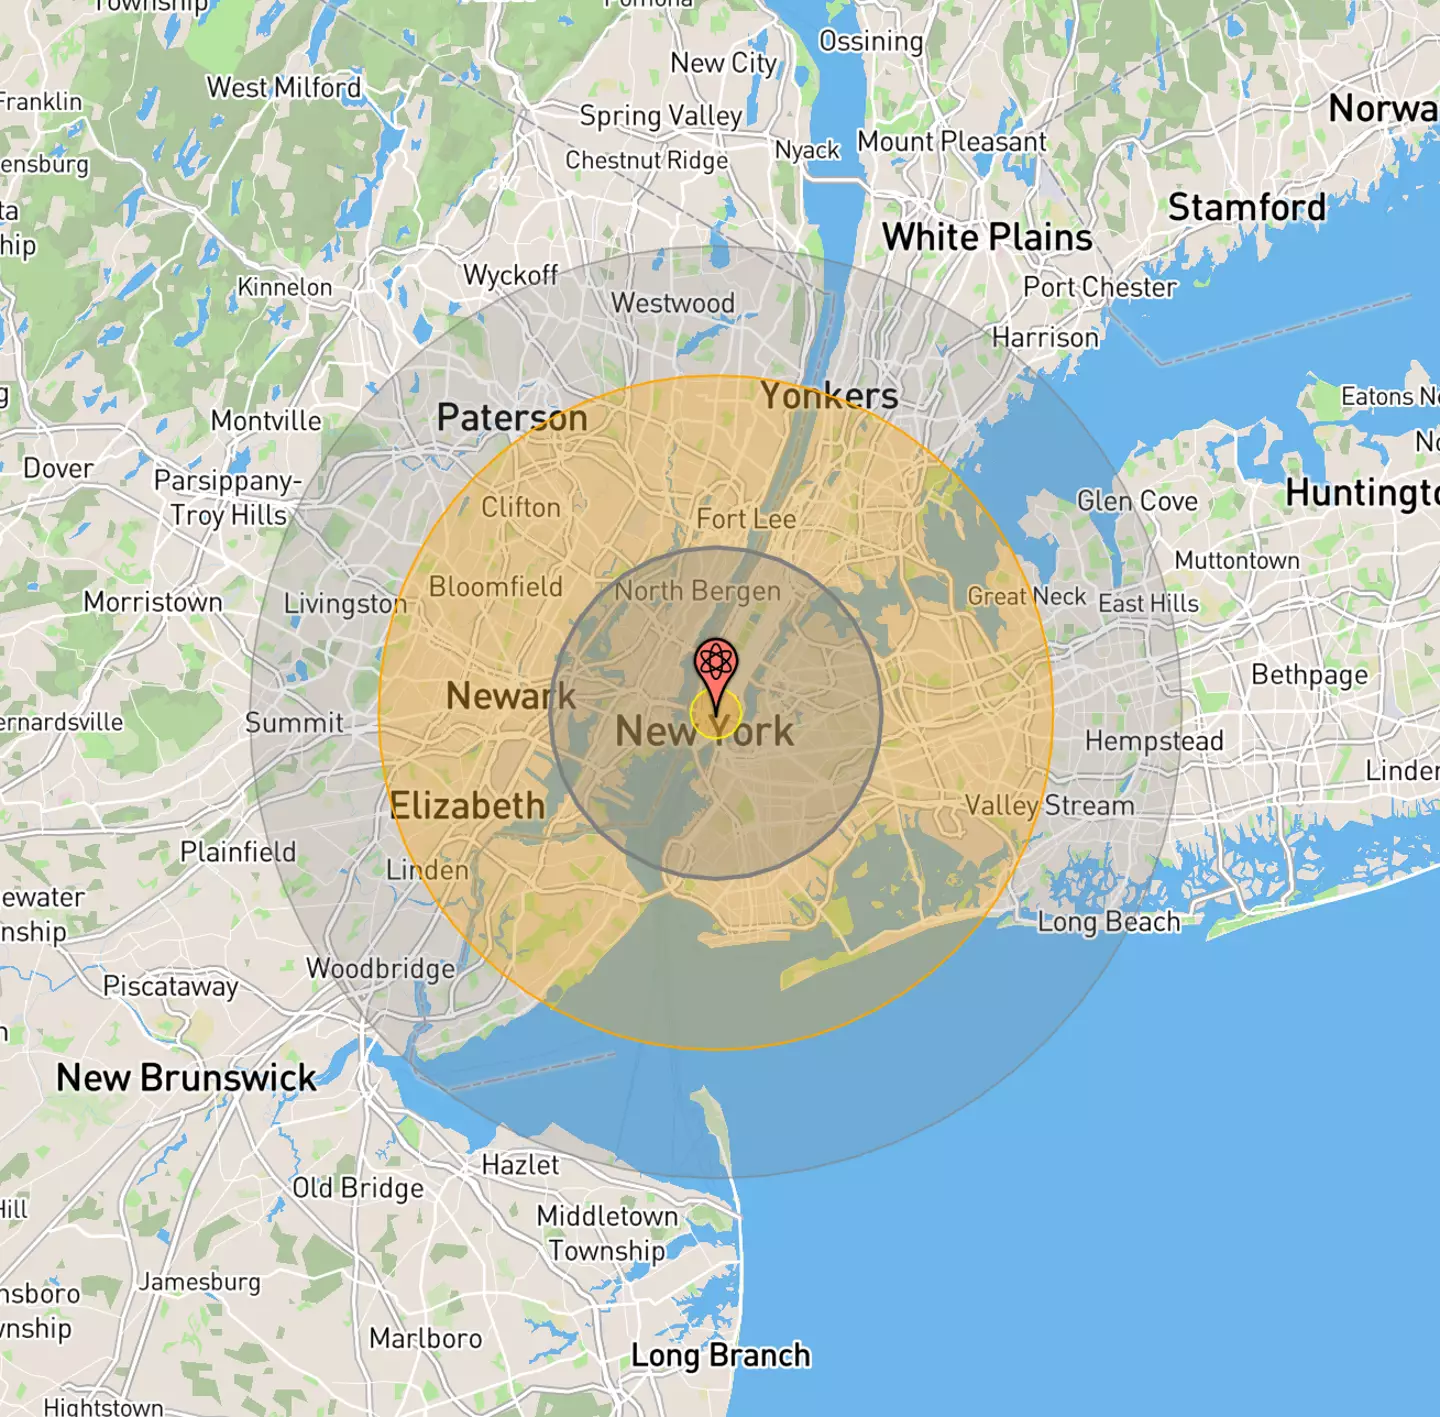 A Chinese nuke over New York City.